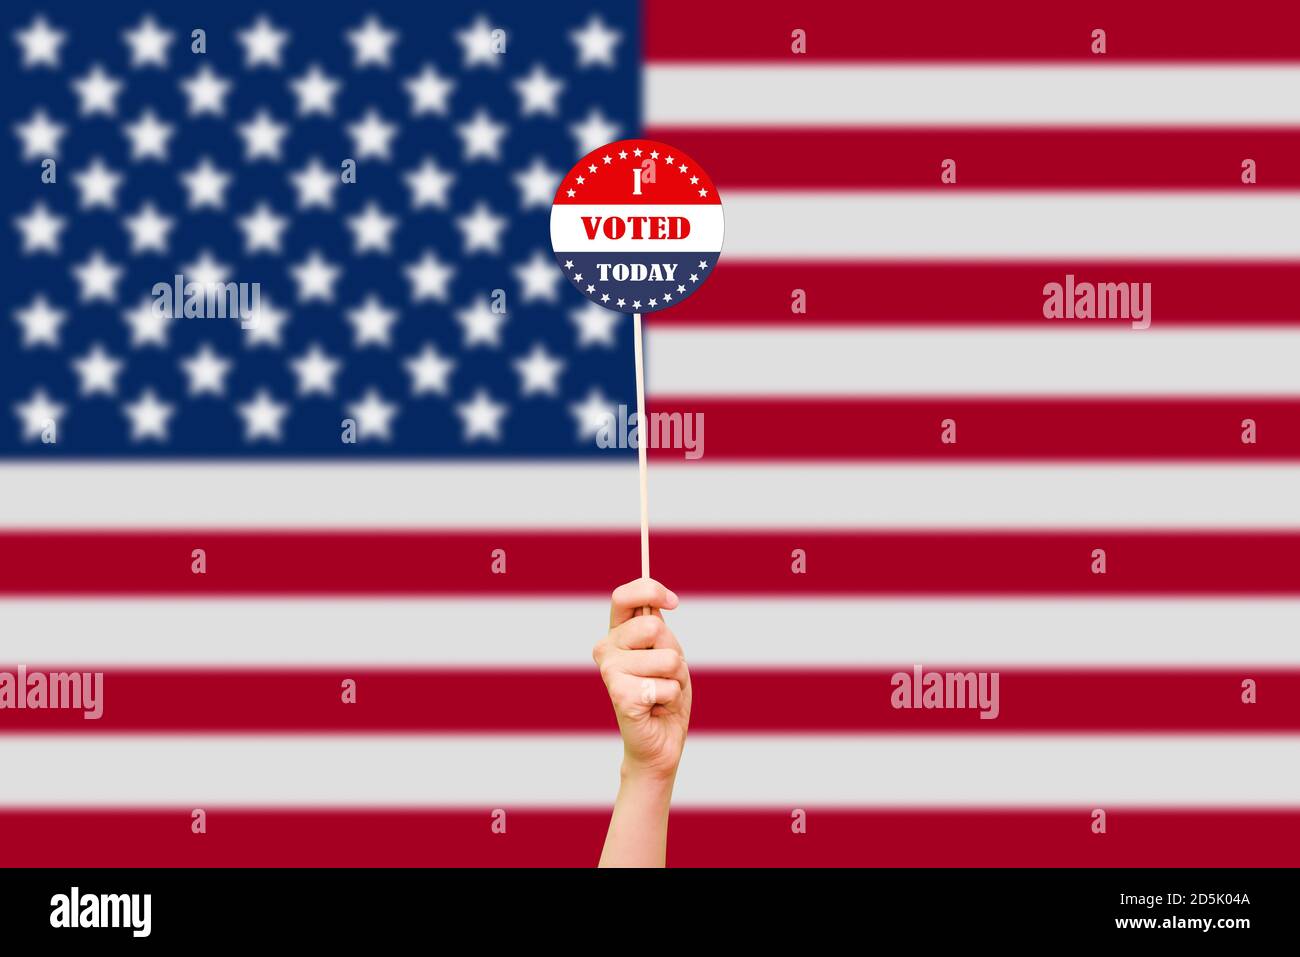 Presidential election 2020 in the United States. Icon for voting in elections. Stock Photo